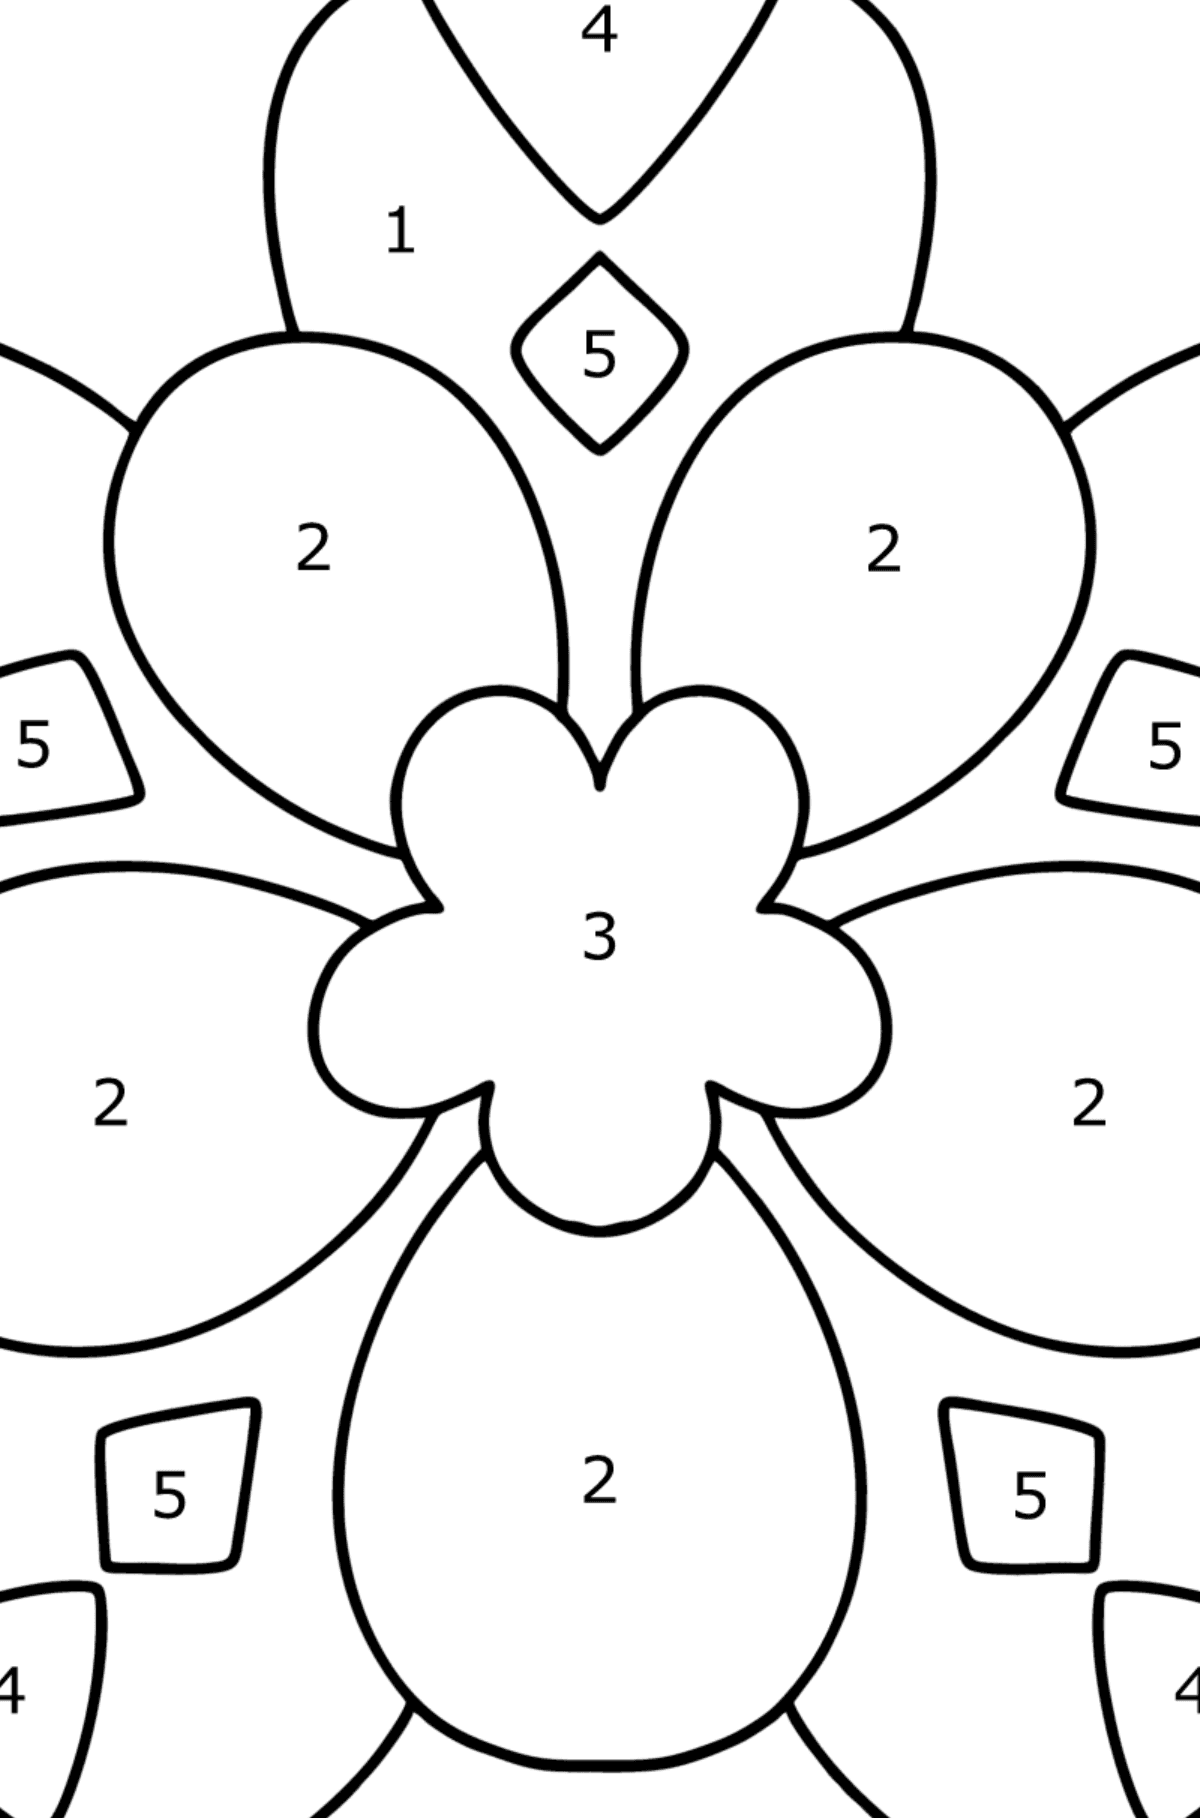 Anti stress Heart coloring page - Coloring by Numbers for Kids